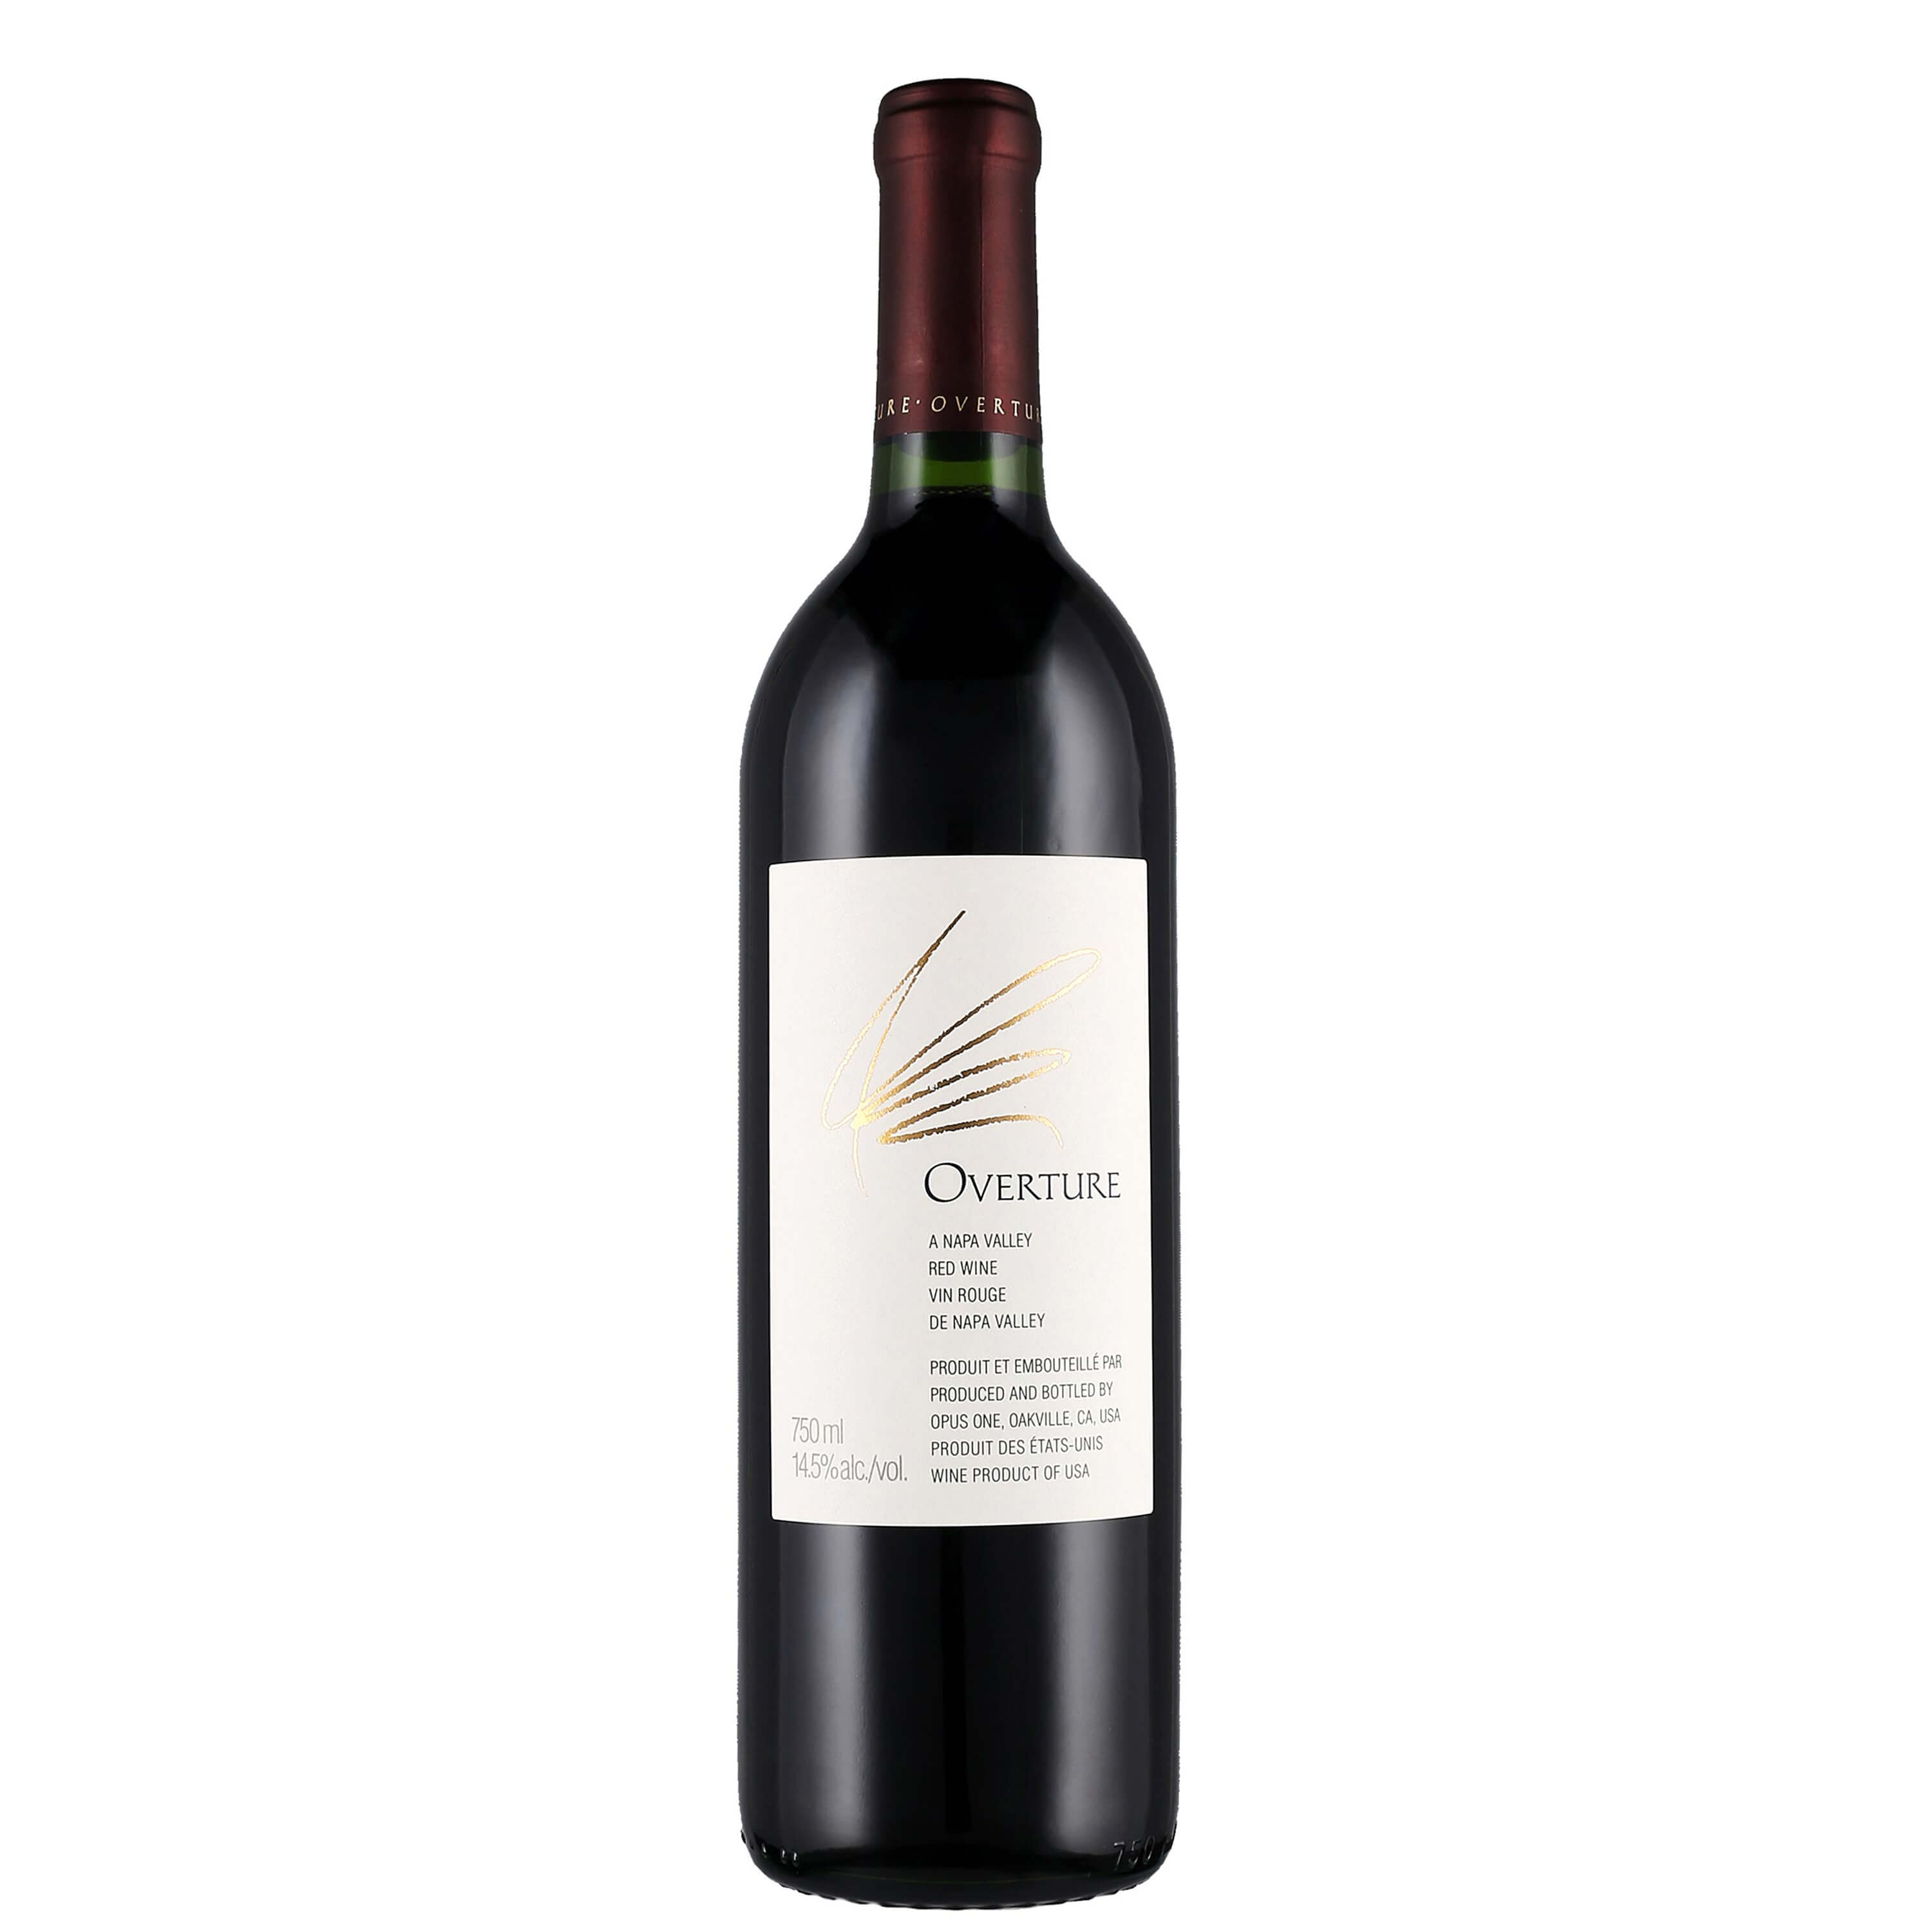 opus one napa red